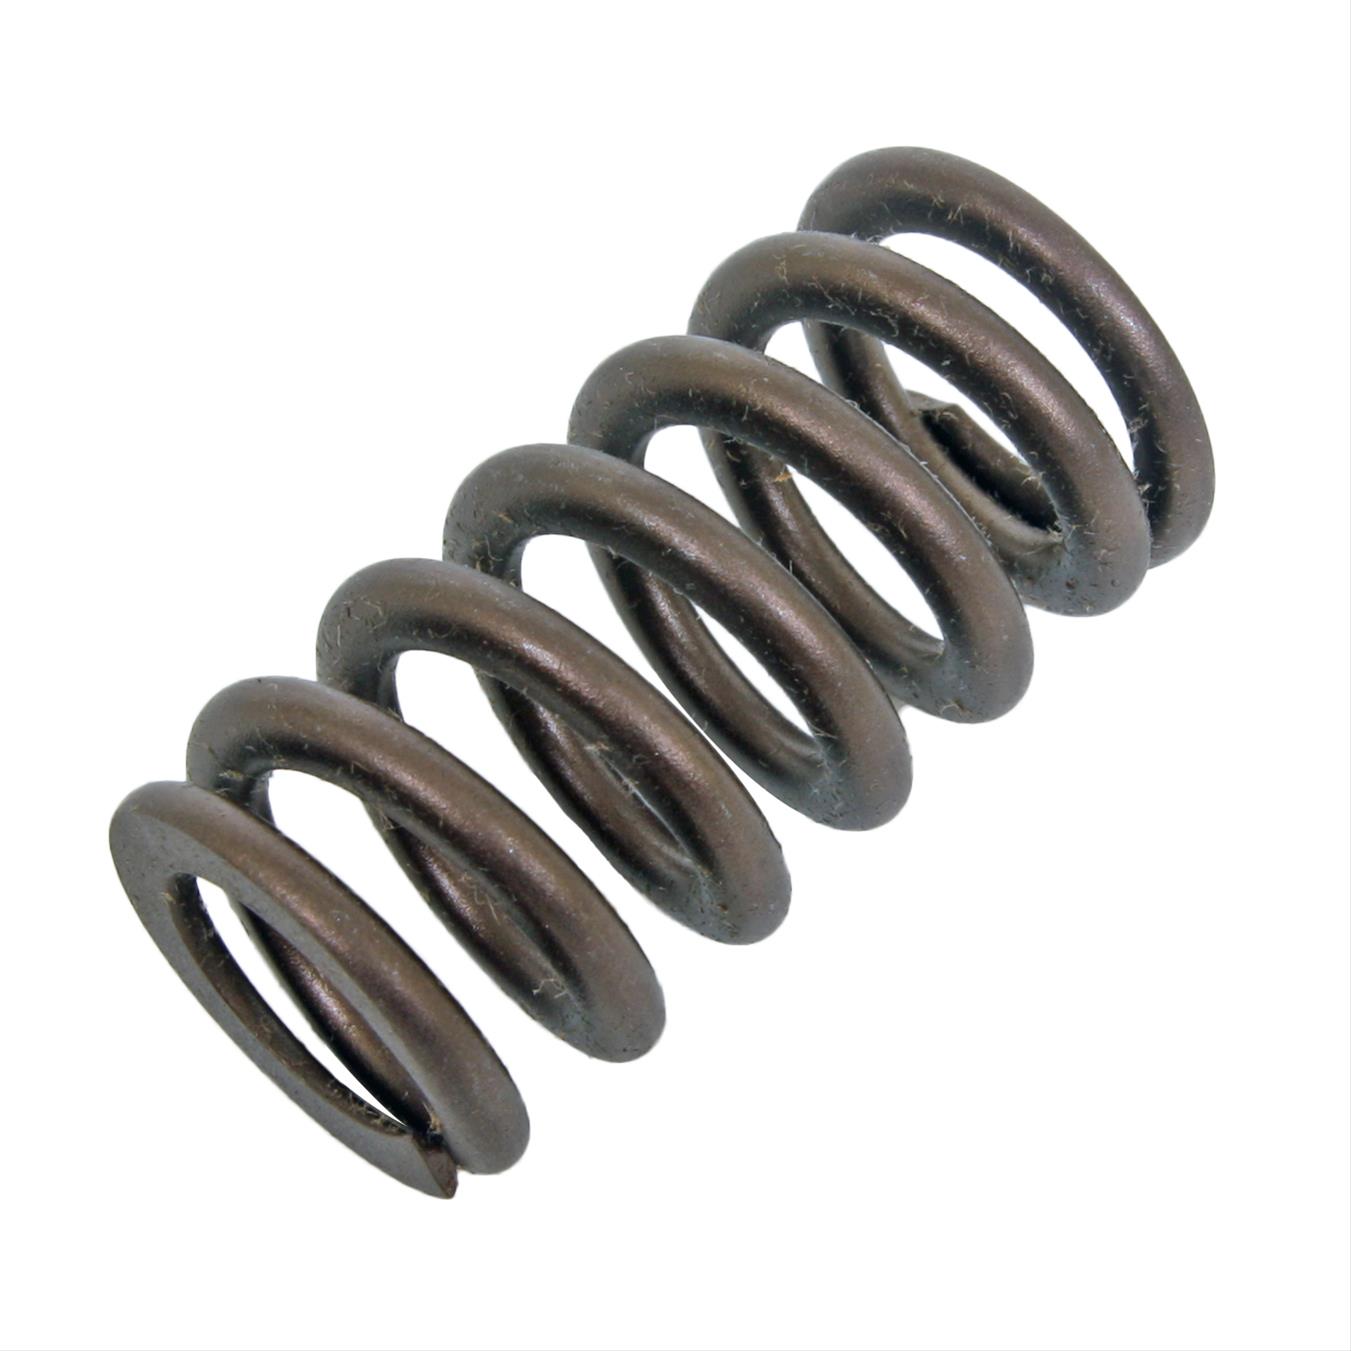 FORD 4.6L 2 VALVE BEEHIVE SPRING SINGLE .600 LIFT